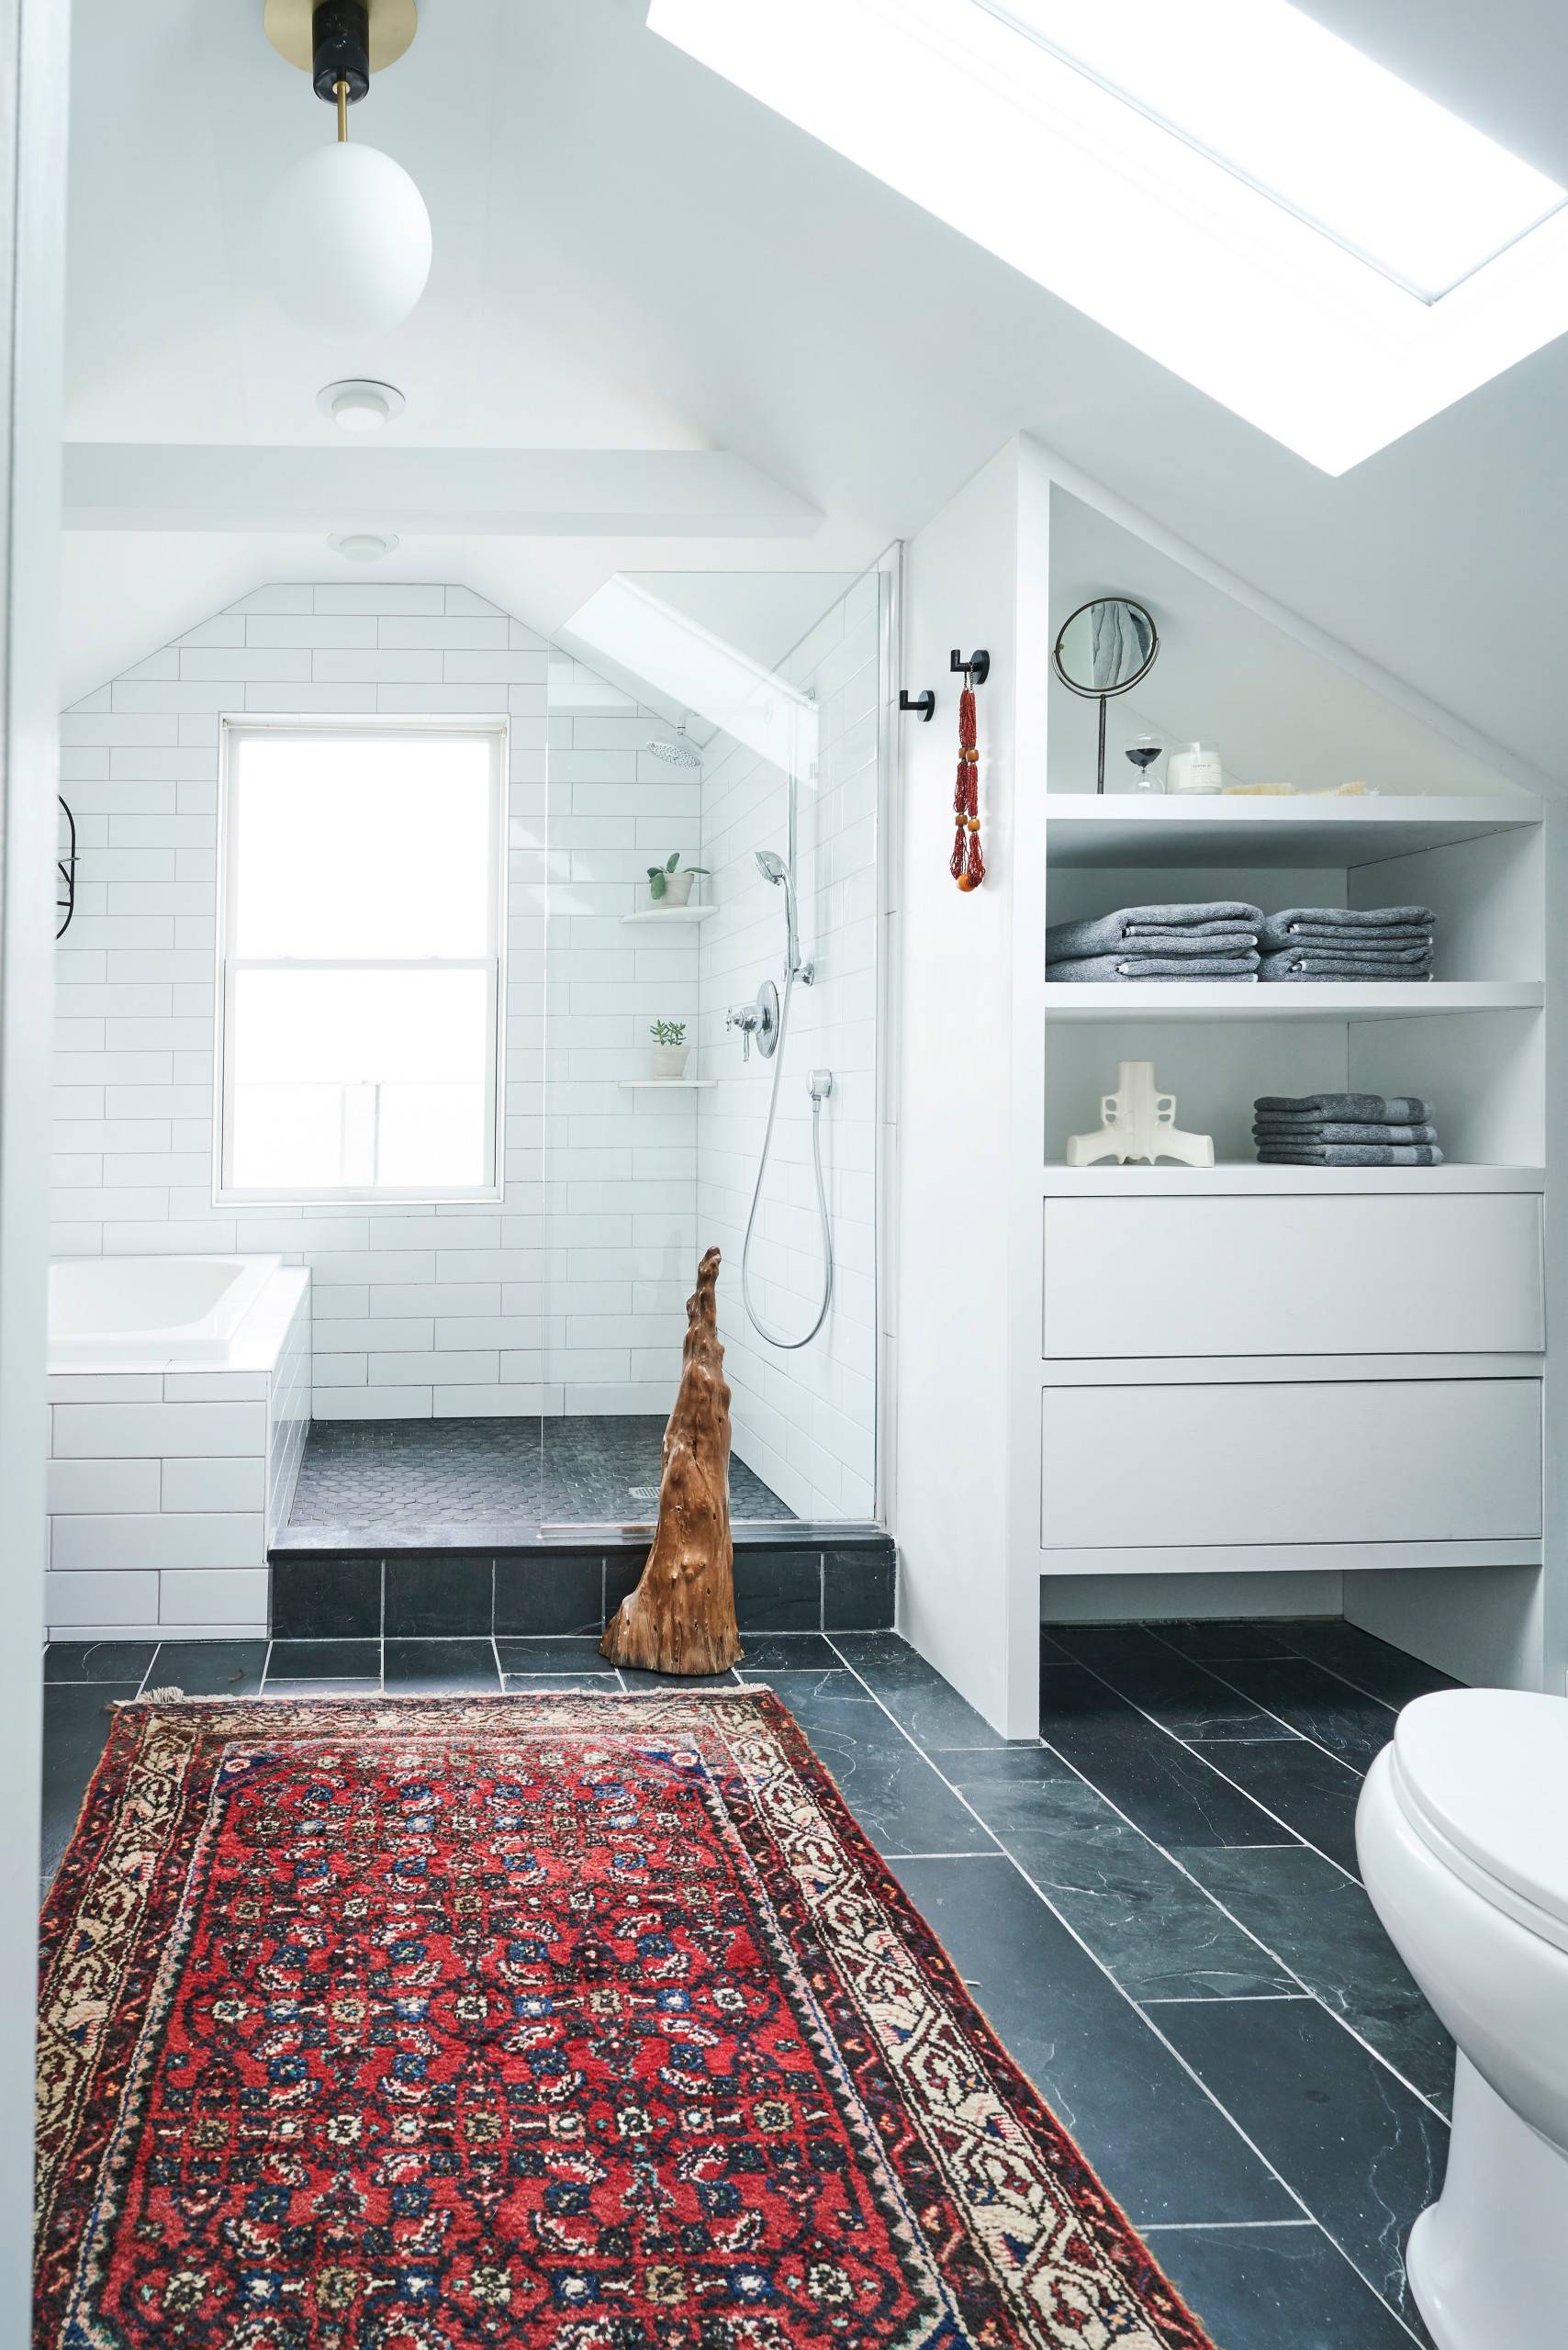 Charming bathroom design (from Houzz)